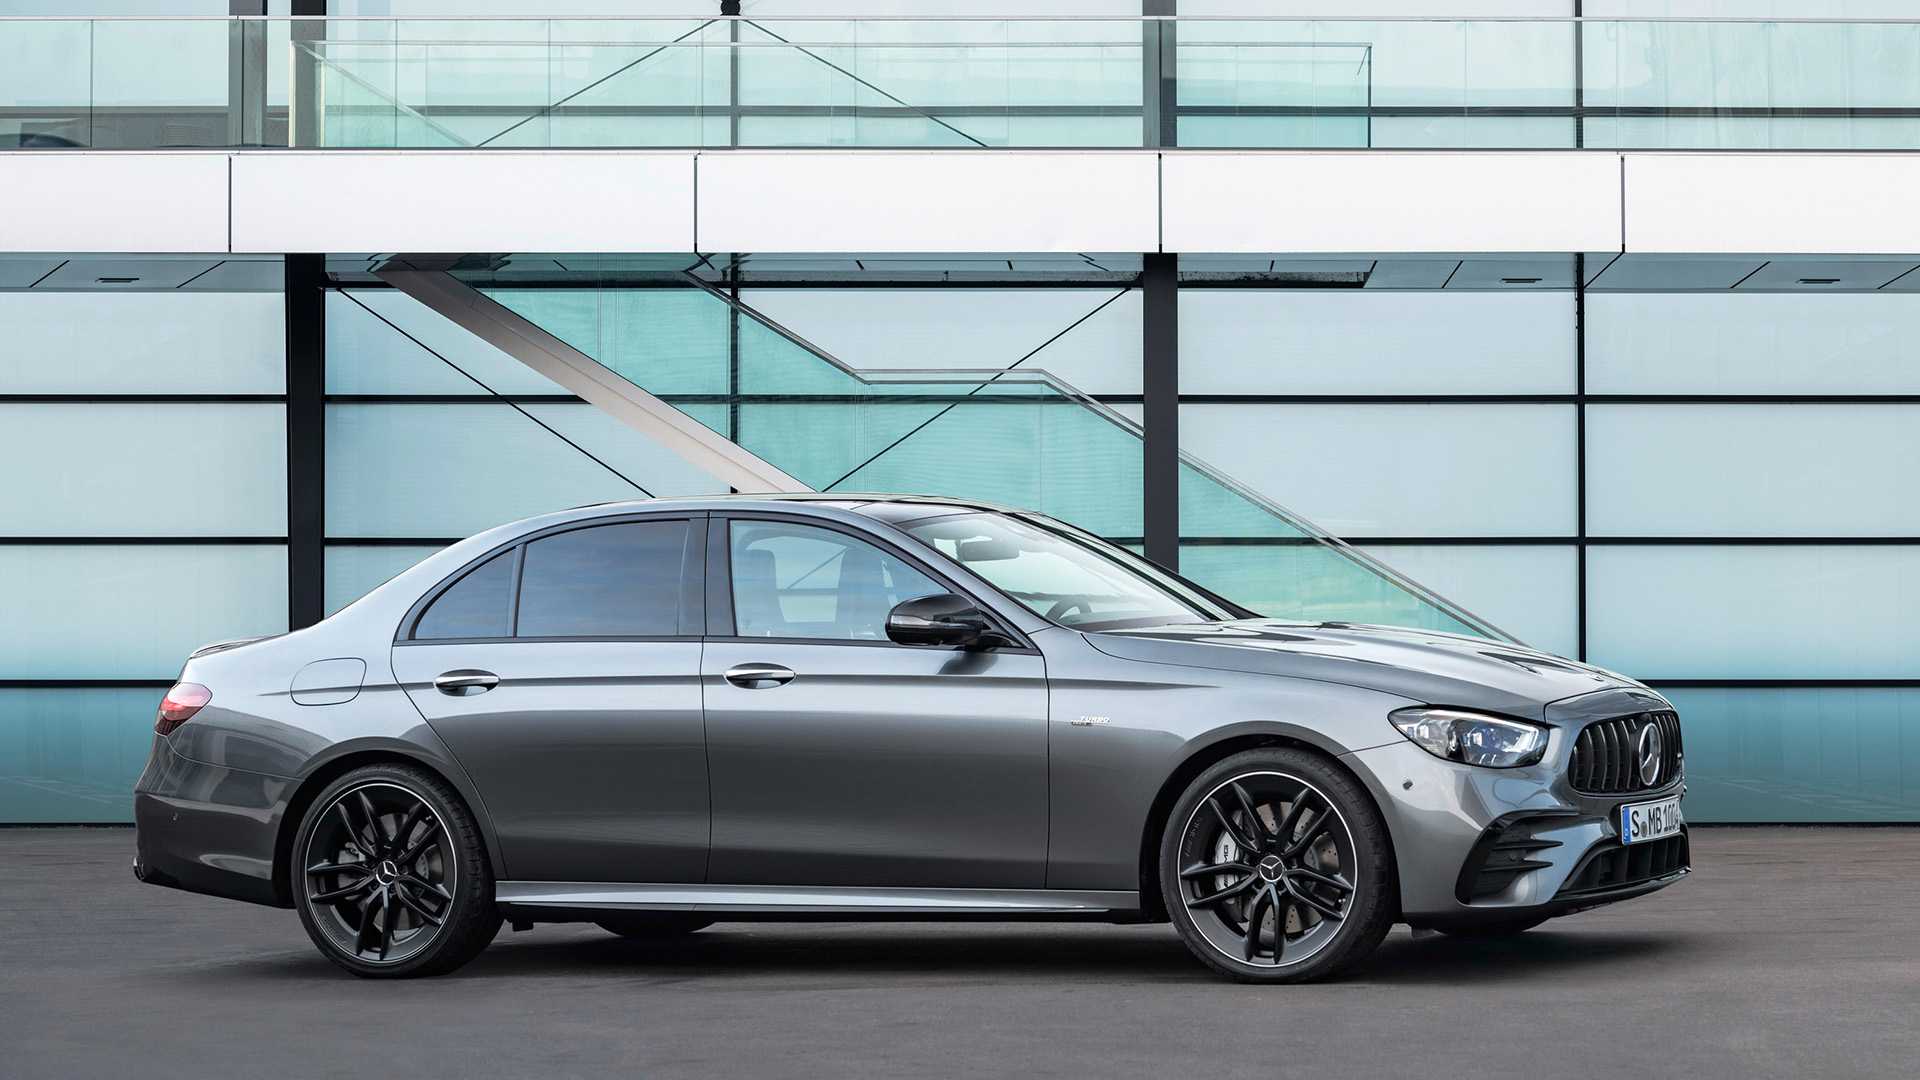 2020 MercedesBenz EClass Prices Reviews and Photos  MotorTrend